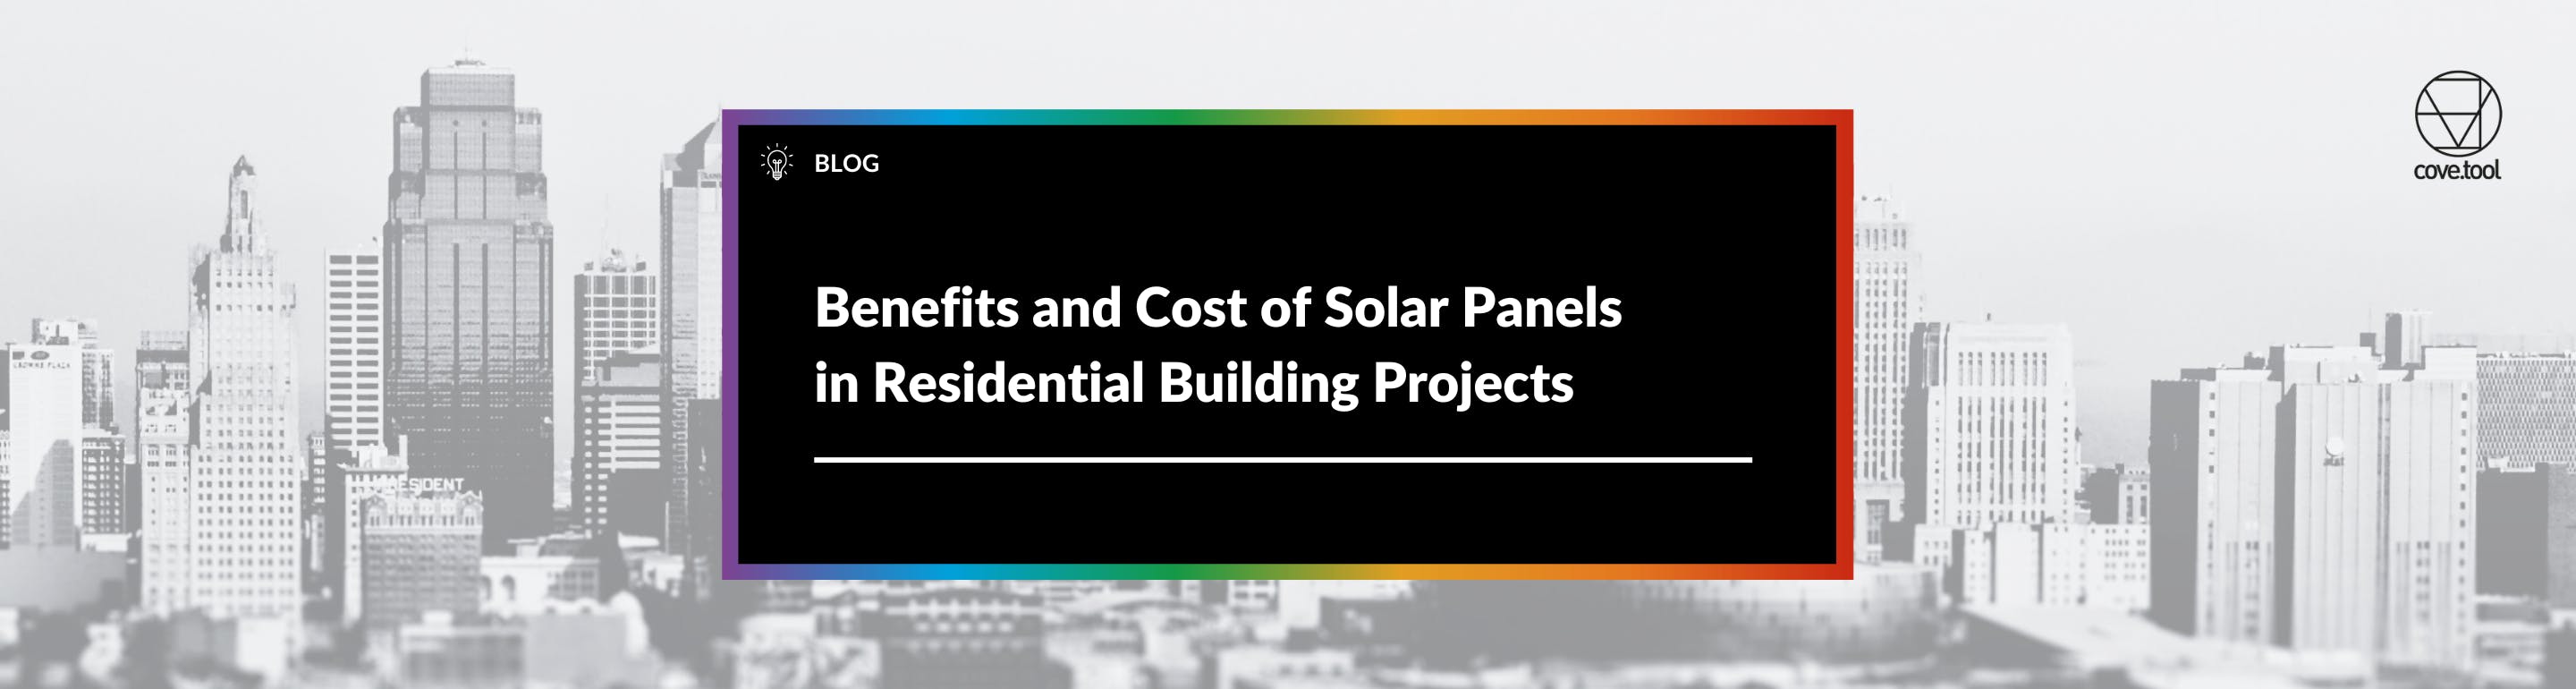 Benefits and Cost of Solar Panels in Residential Building Projects 